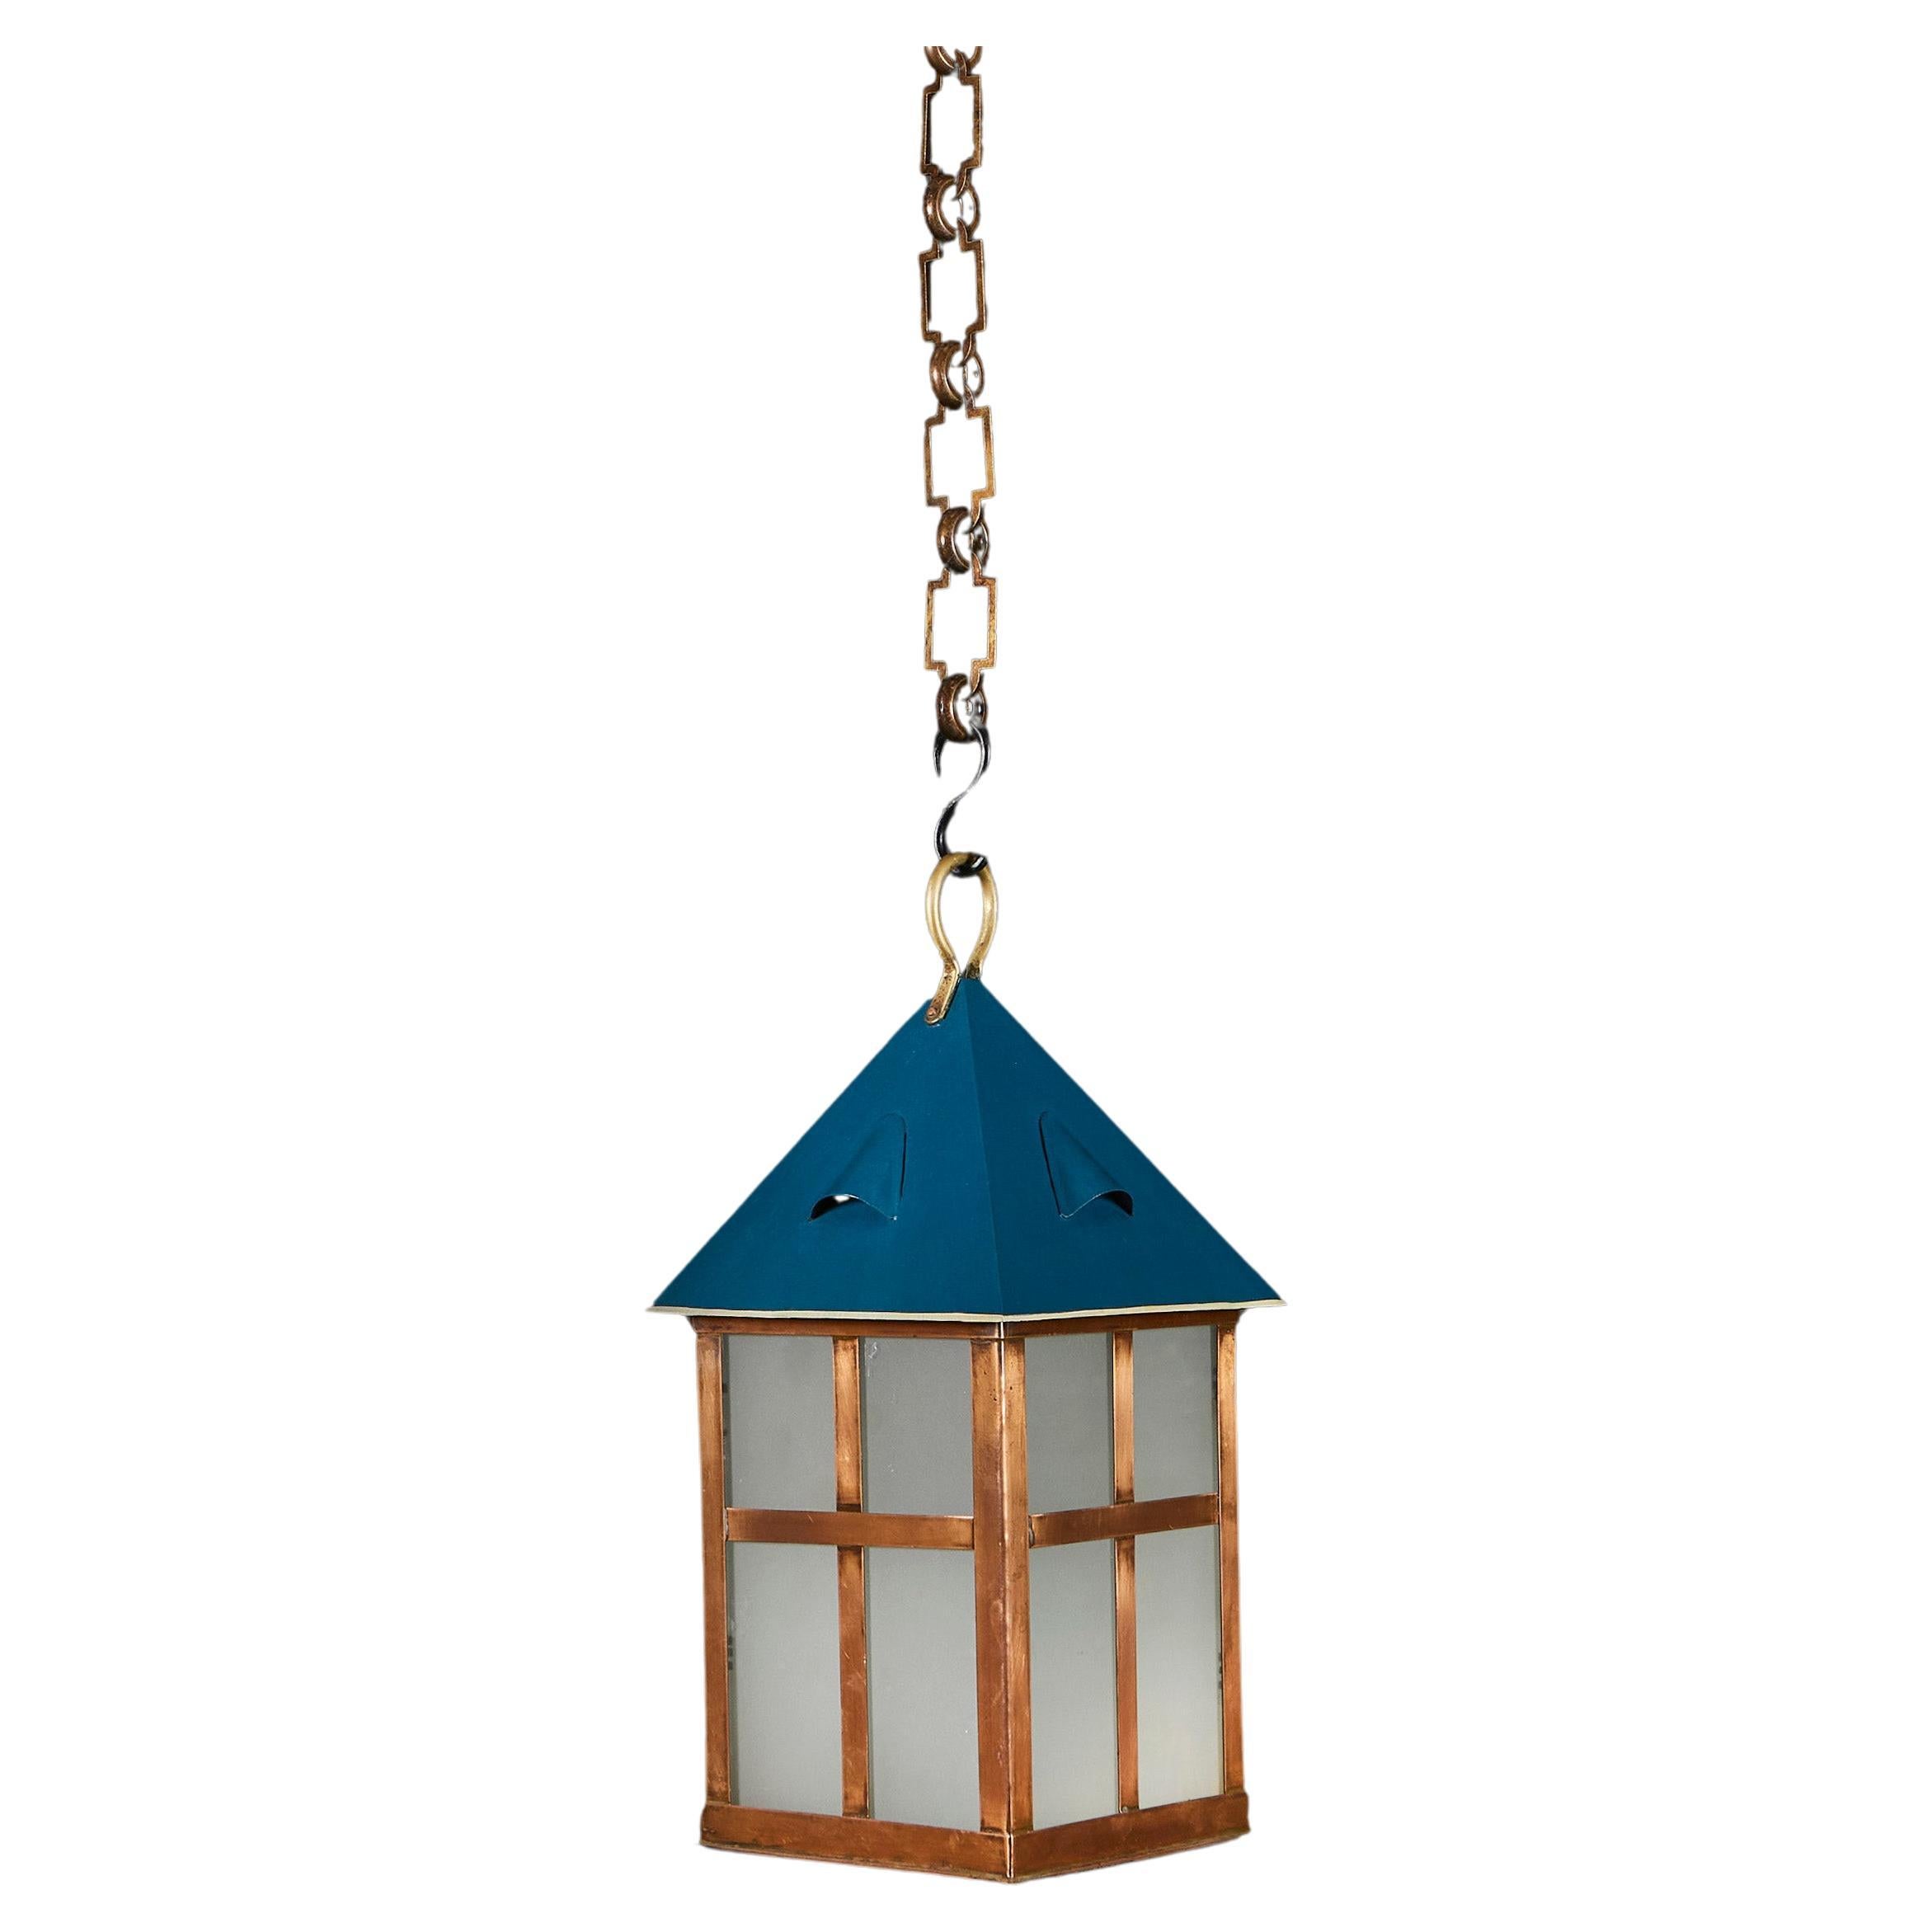 A Copper Arts and Crafts Hanging Lantern  For Sale